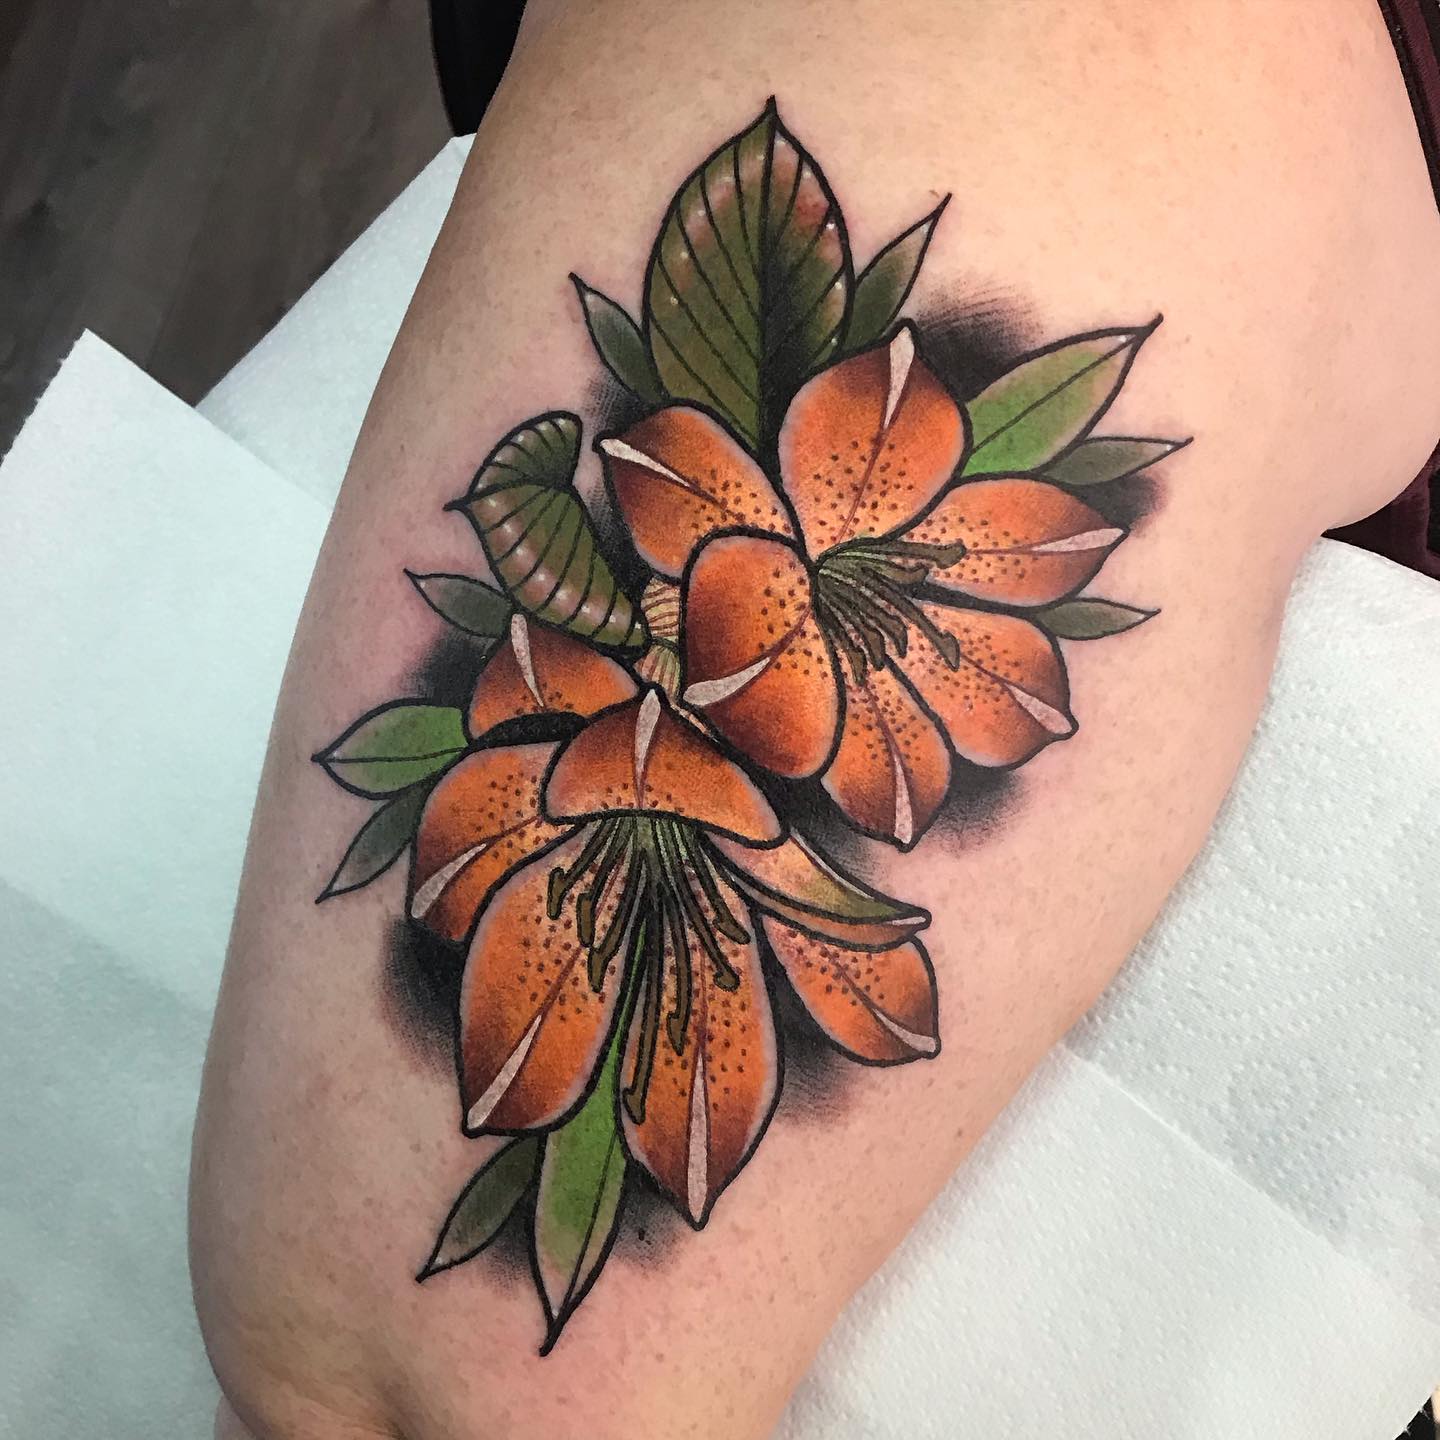 Orange lilies are a nice, soft, feminine tattoo. It's nice that the leaves are added to the design. The colors are very vibrant and they go together. Those who are looking for something pretty but not too loud and flashy will adore it for sure.